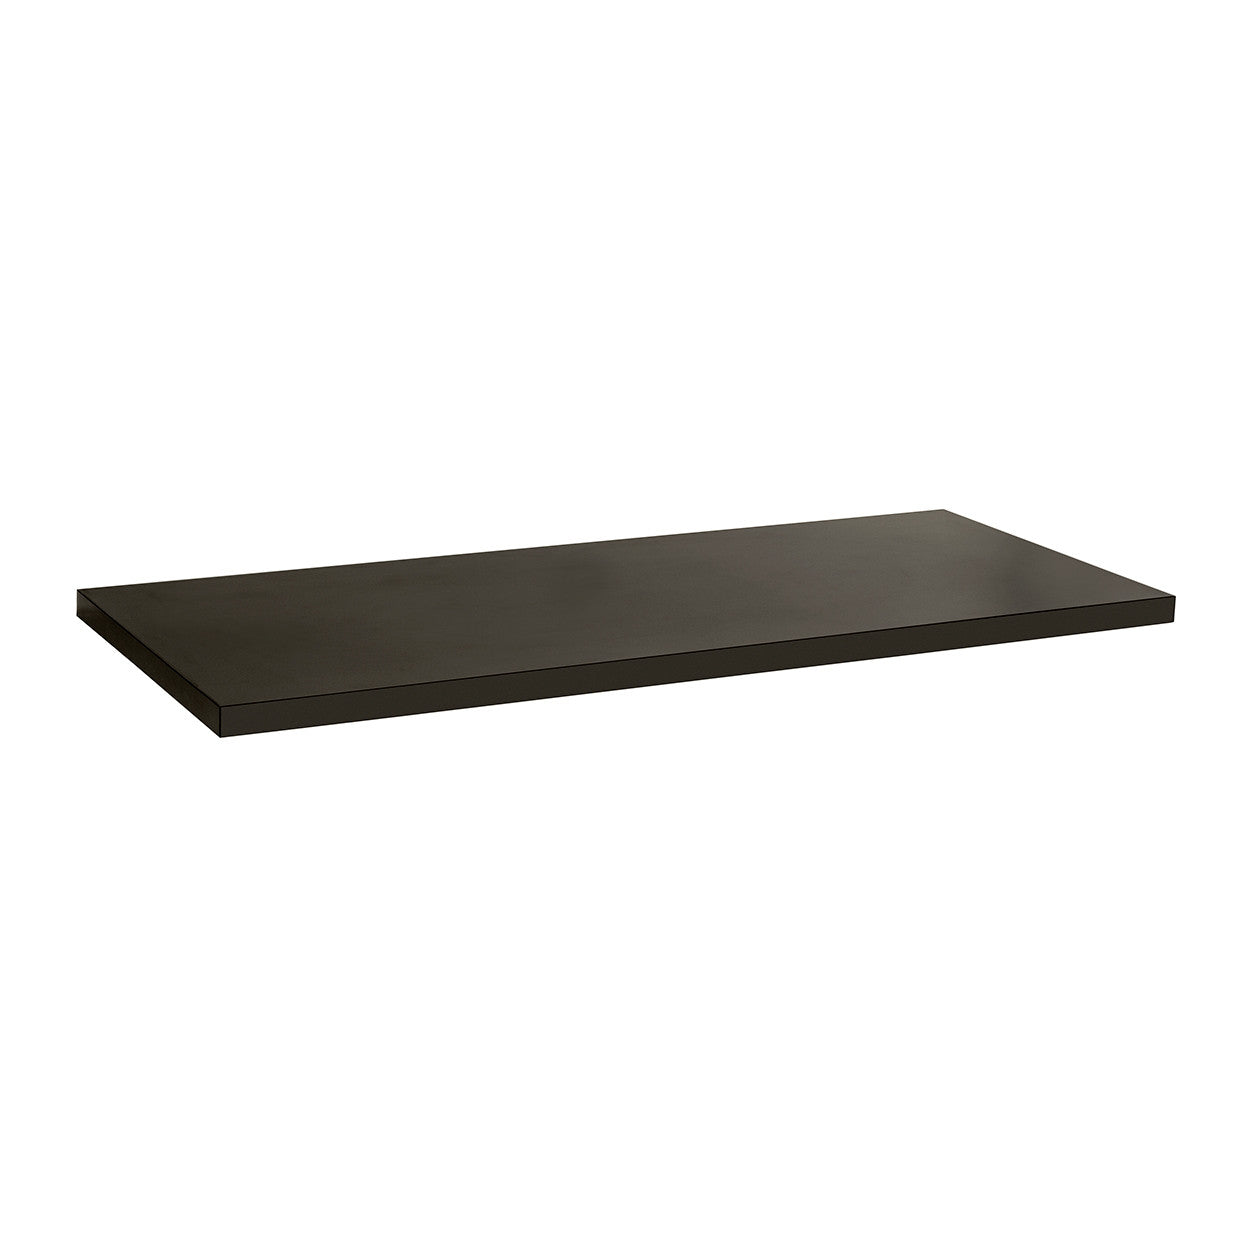 Additional Shelf for Counter with Shelf Supports - Black W1126 x D465 x T30